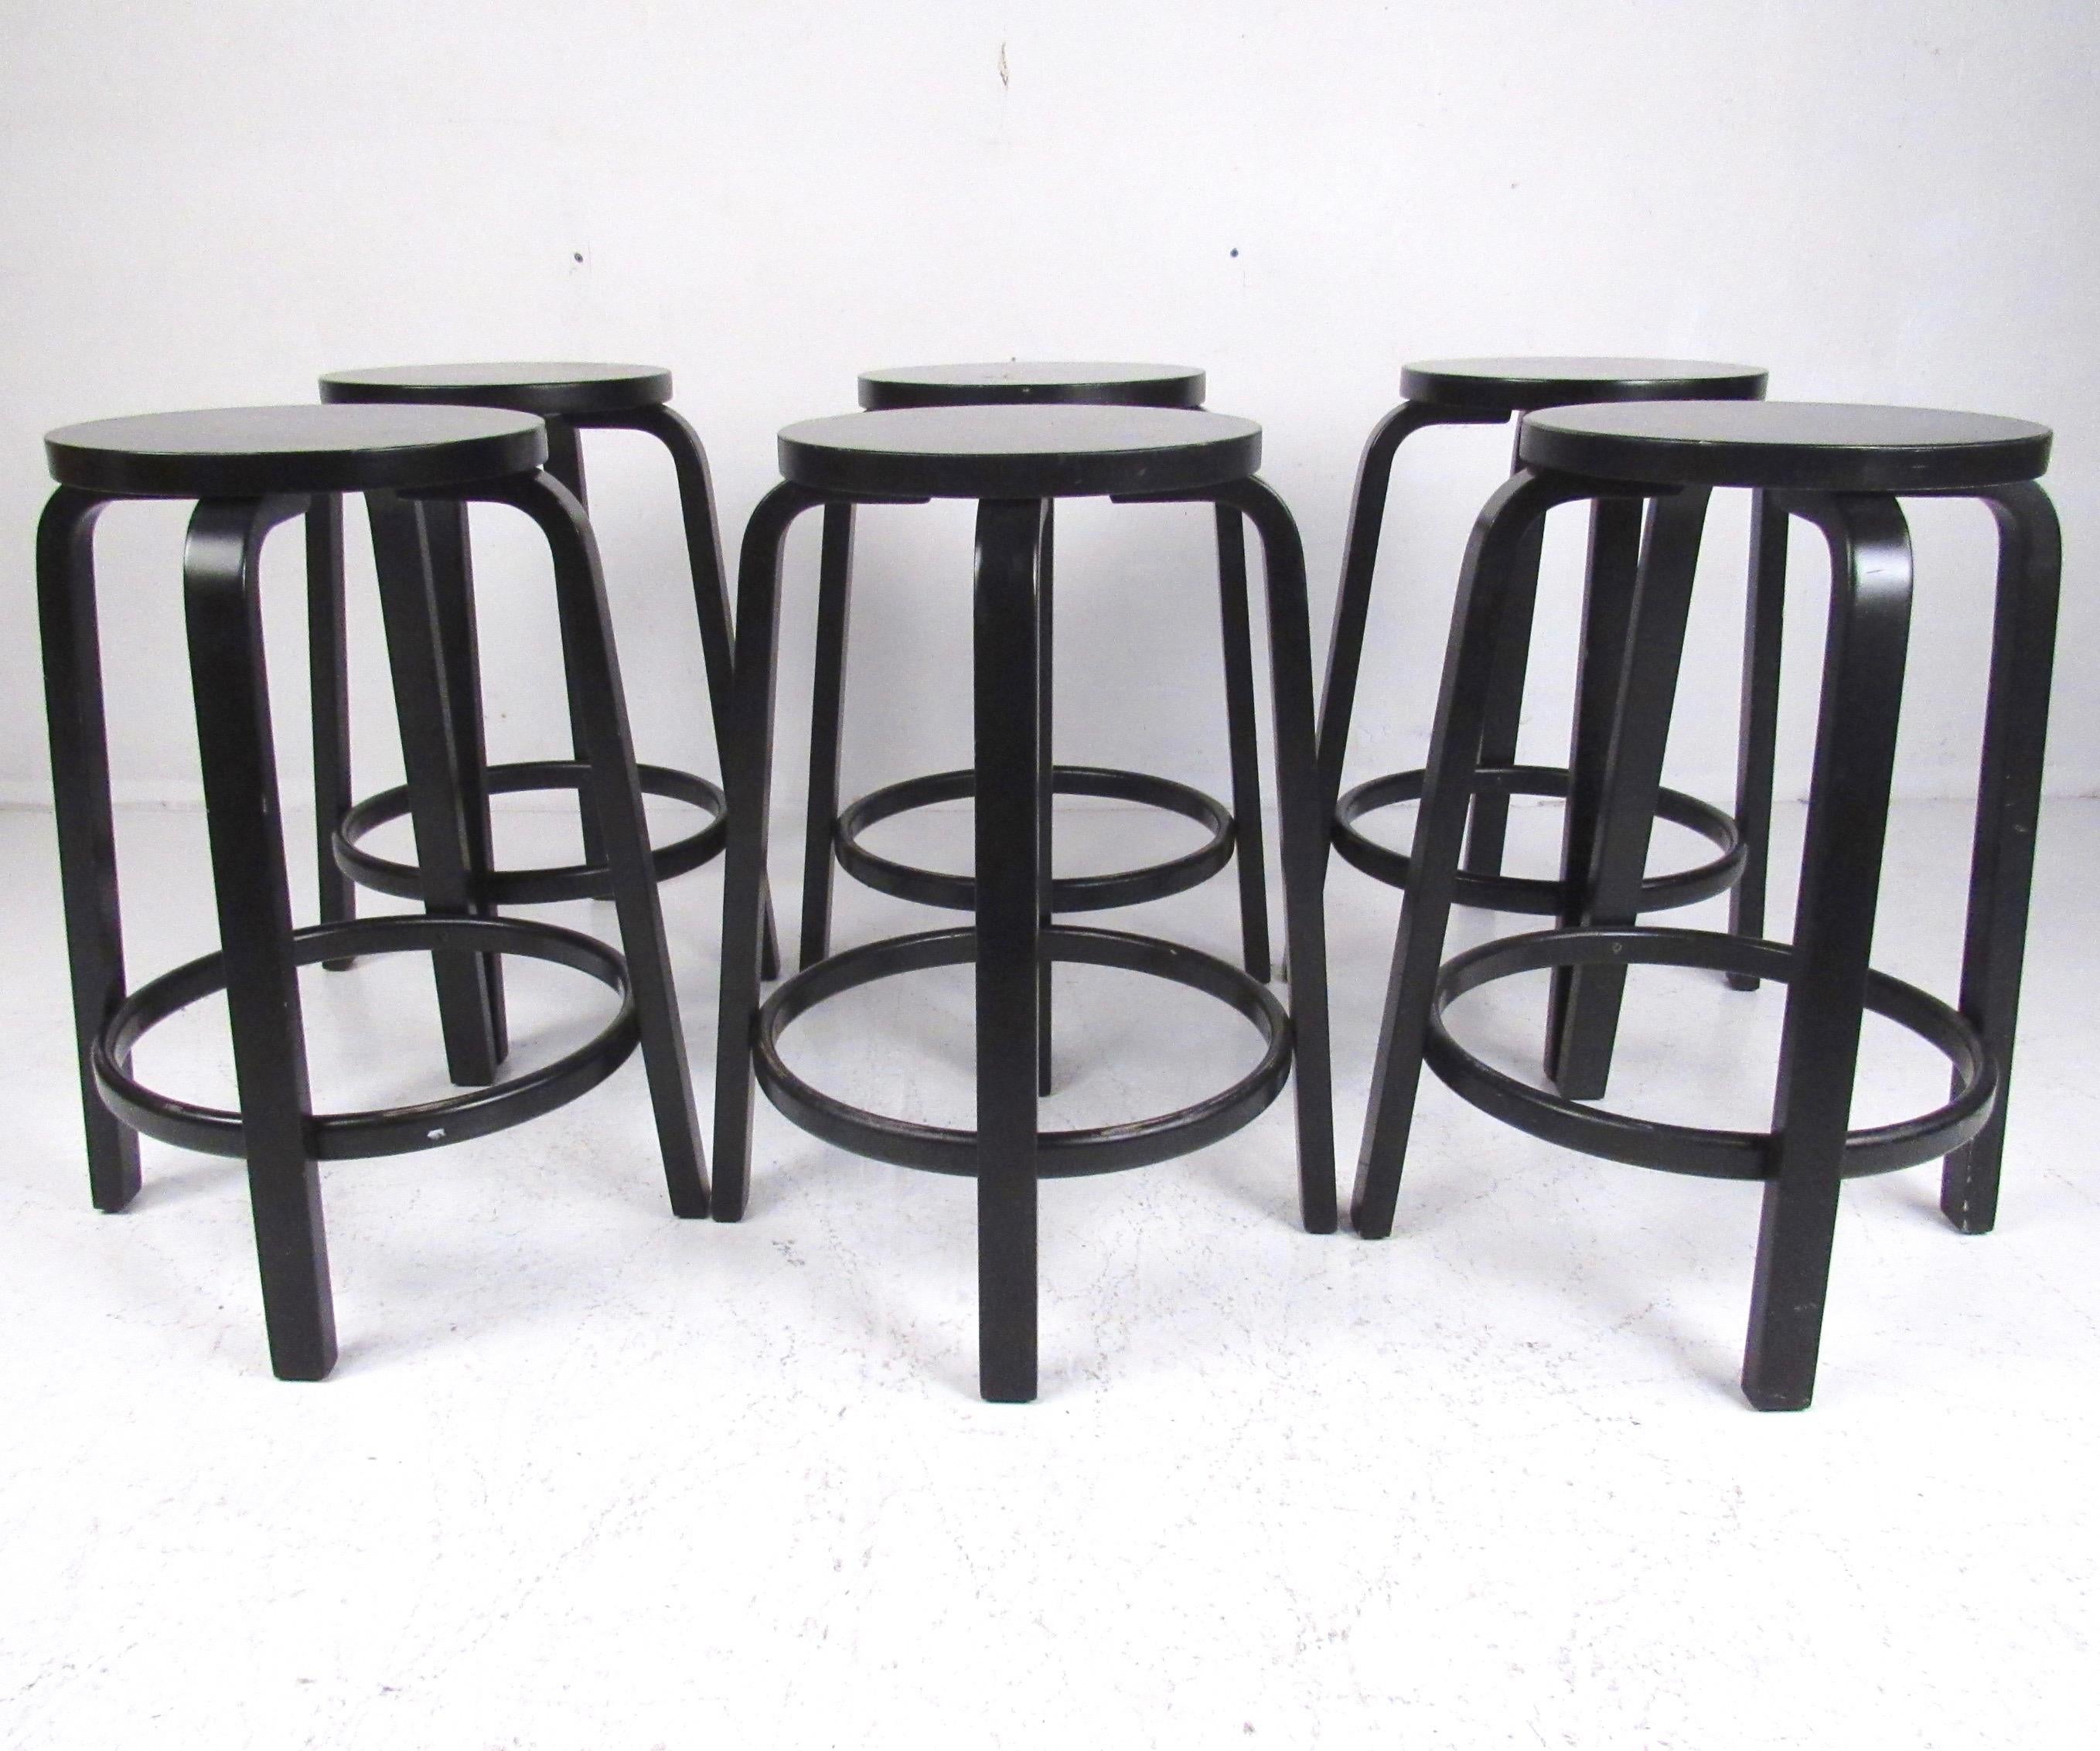 This stylish set of modern bar stools by Alvar Alto feature Italian design with ebonized finish for Artek, a contemporary manufacture of a Mid-Century Modern design. Bentwood legs and versatile seat height (26.75 inches) make this a sleek set of six